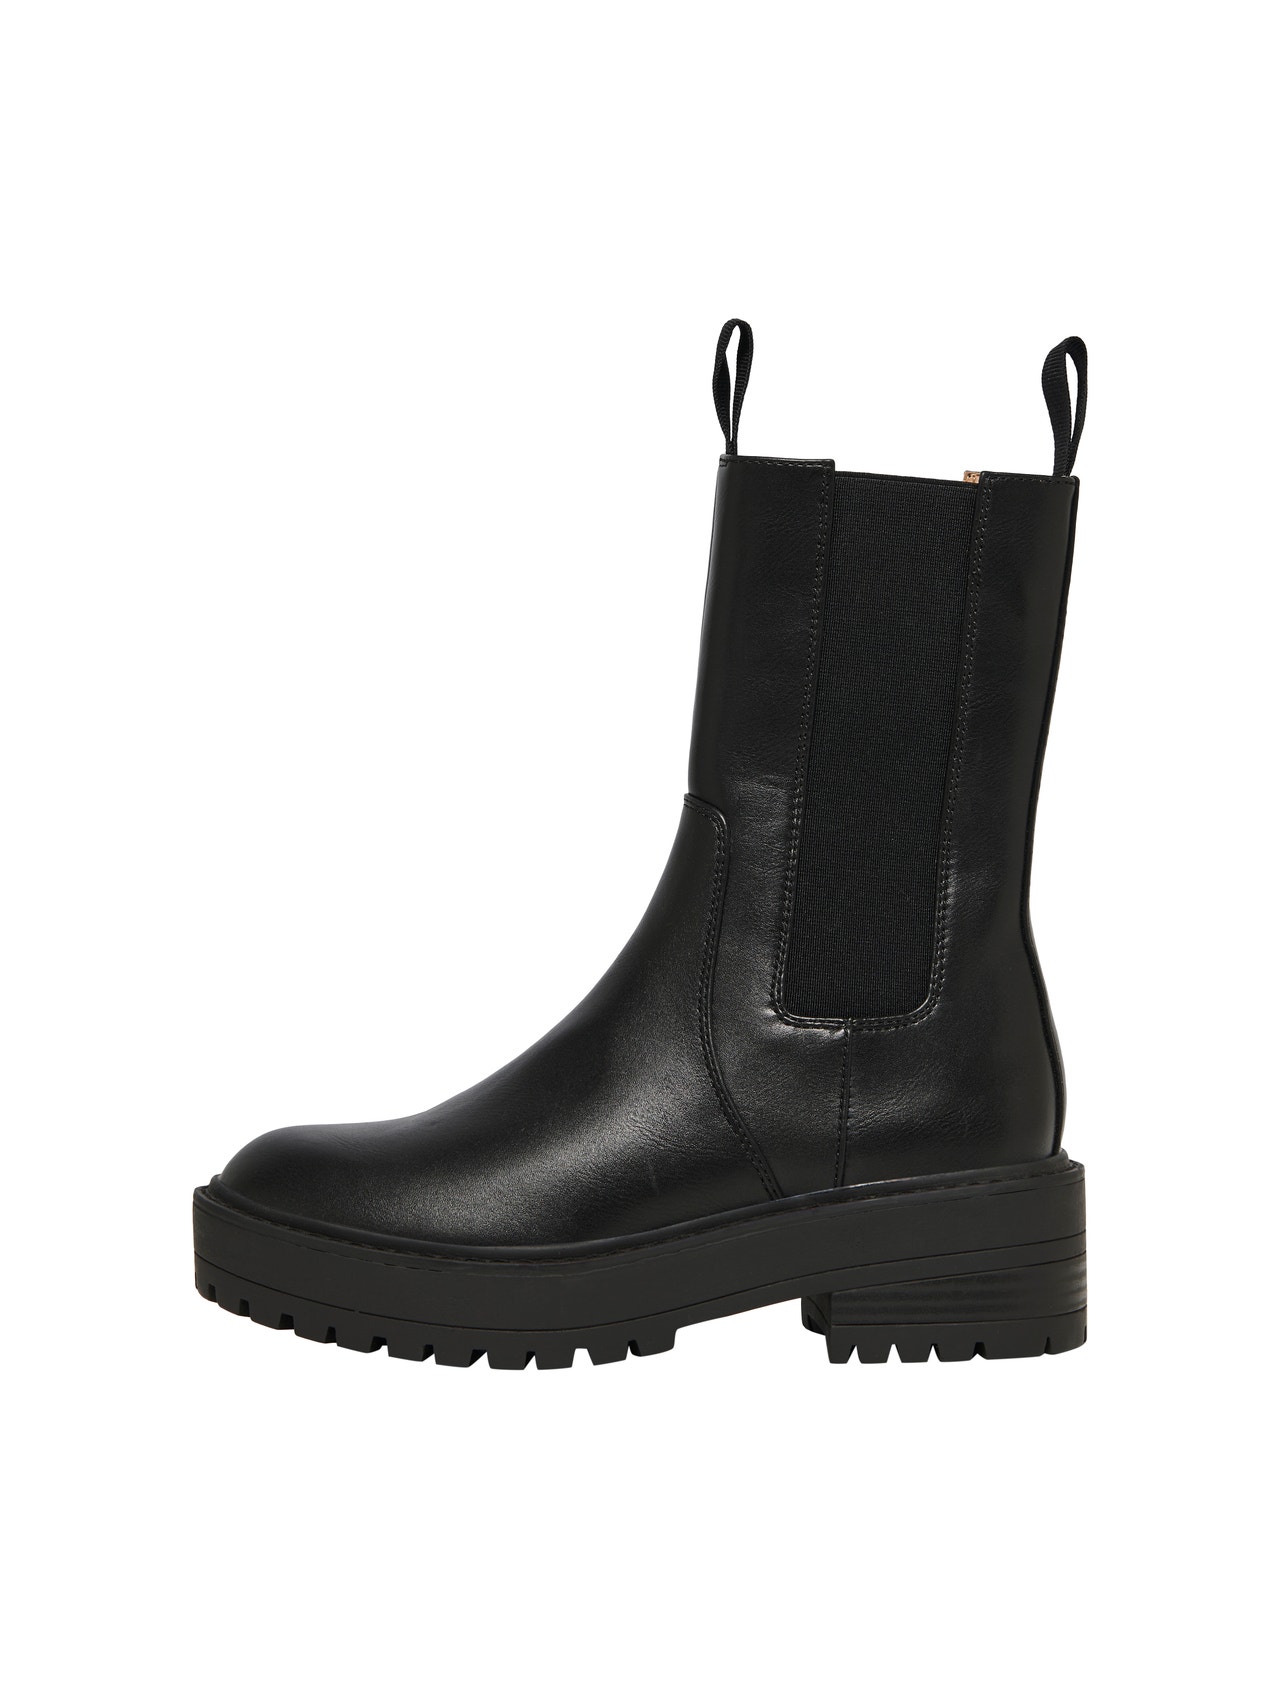 ONLY Round toe Boots -Black - 15226844